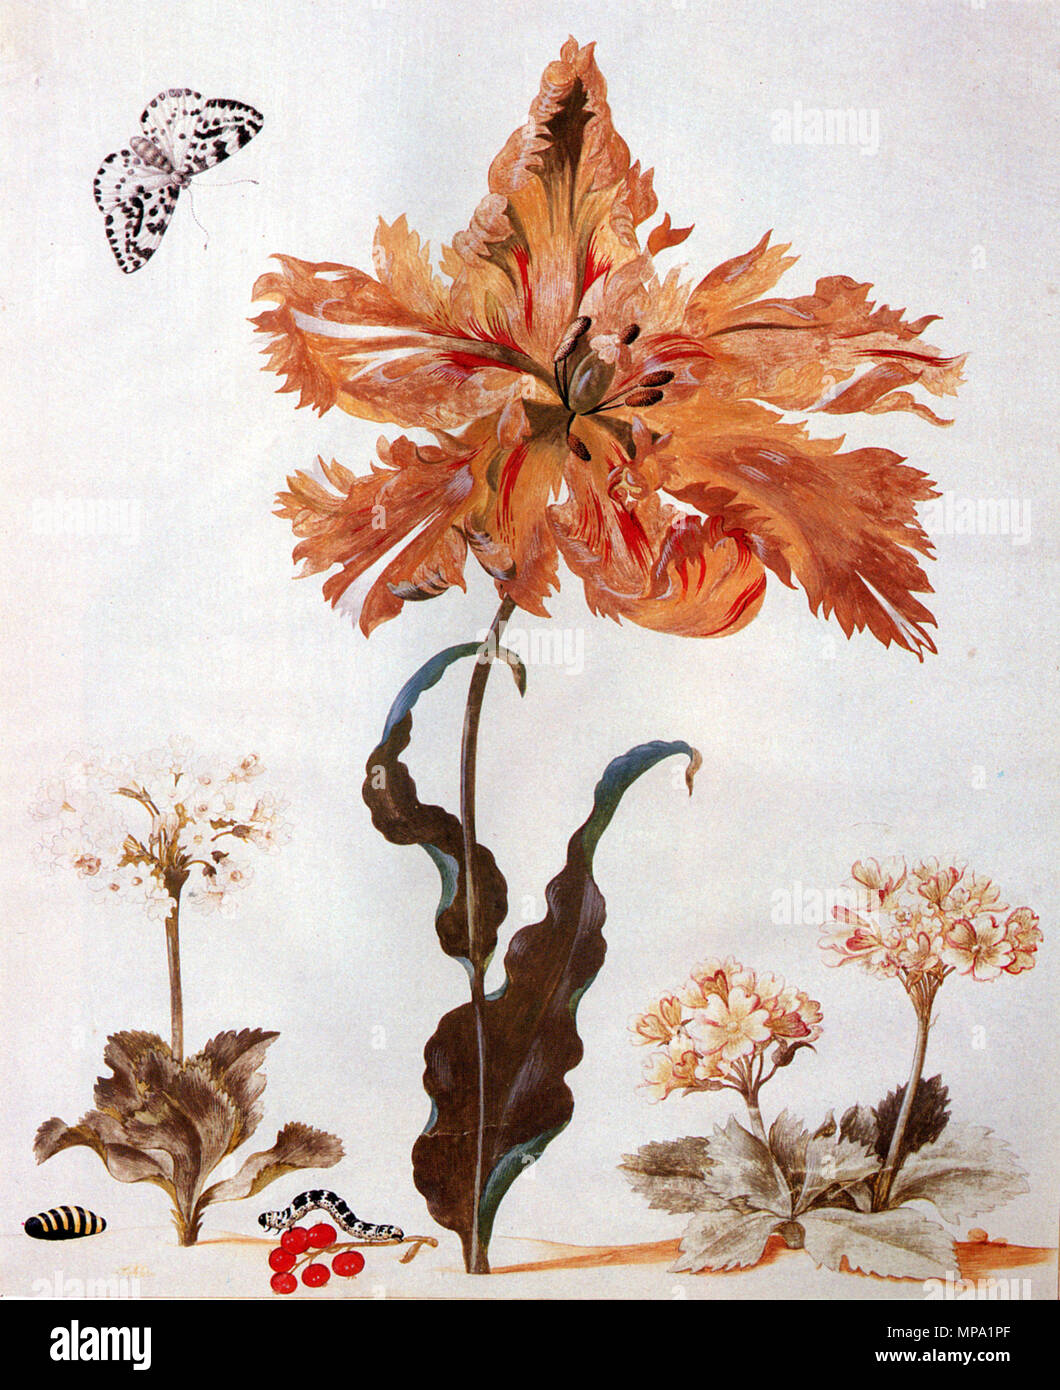 English: A Parrot Tulip, Auriculas, and Red Currants, with a Magpie Moth, its Caterpillar and Pupa    .   859 Maria-Sibylla-Merian-001 Stock Photo